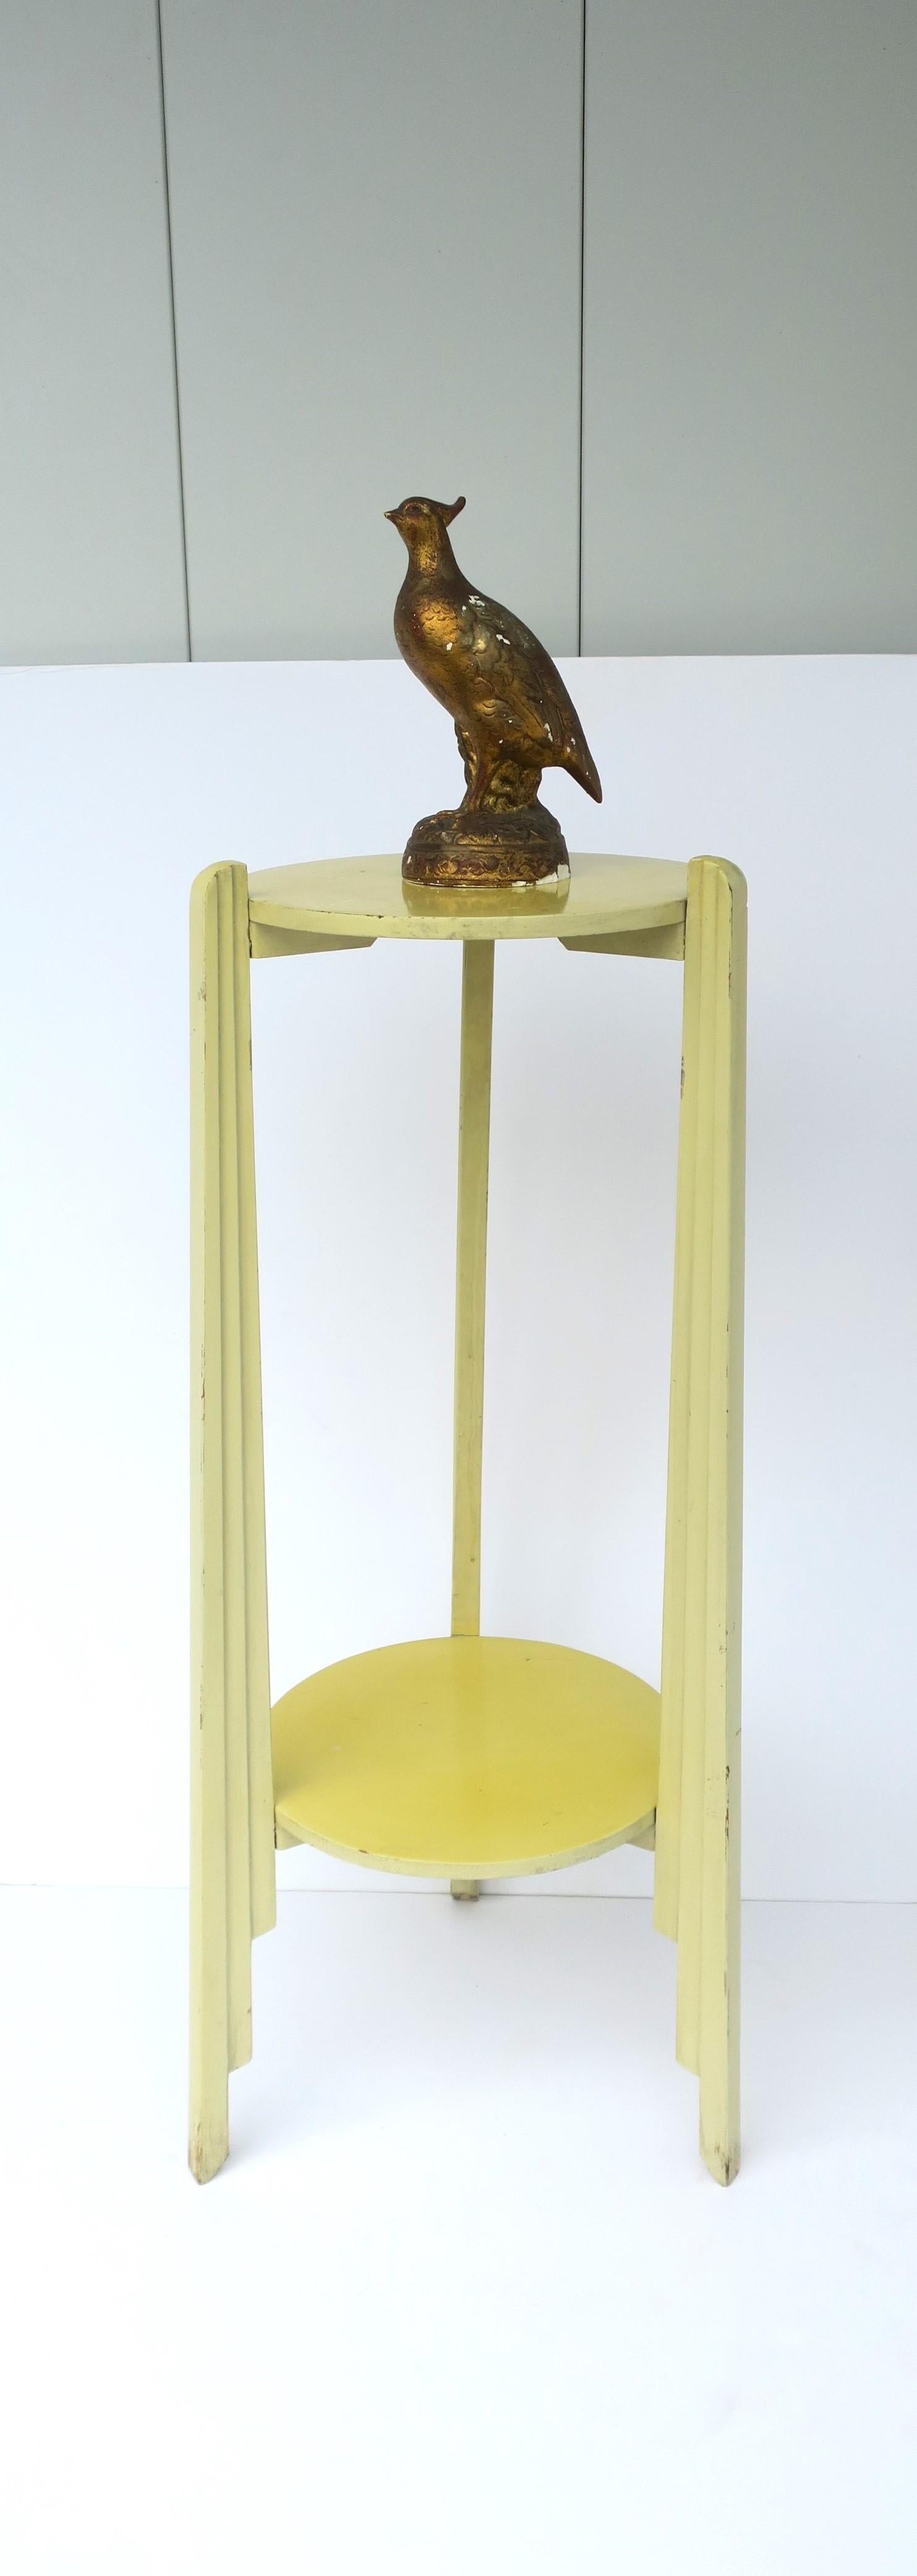 Painted Yellow Art Deco Column Pillar Pedestal Stand with Lower Shelf, 1 of 2 Available For Sale